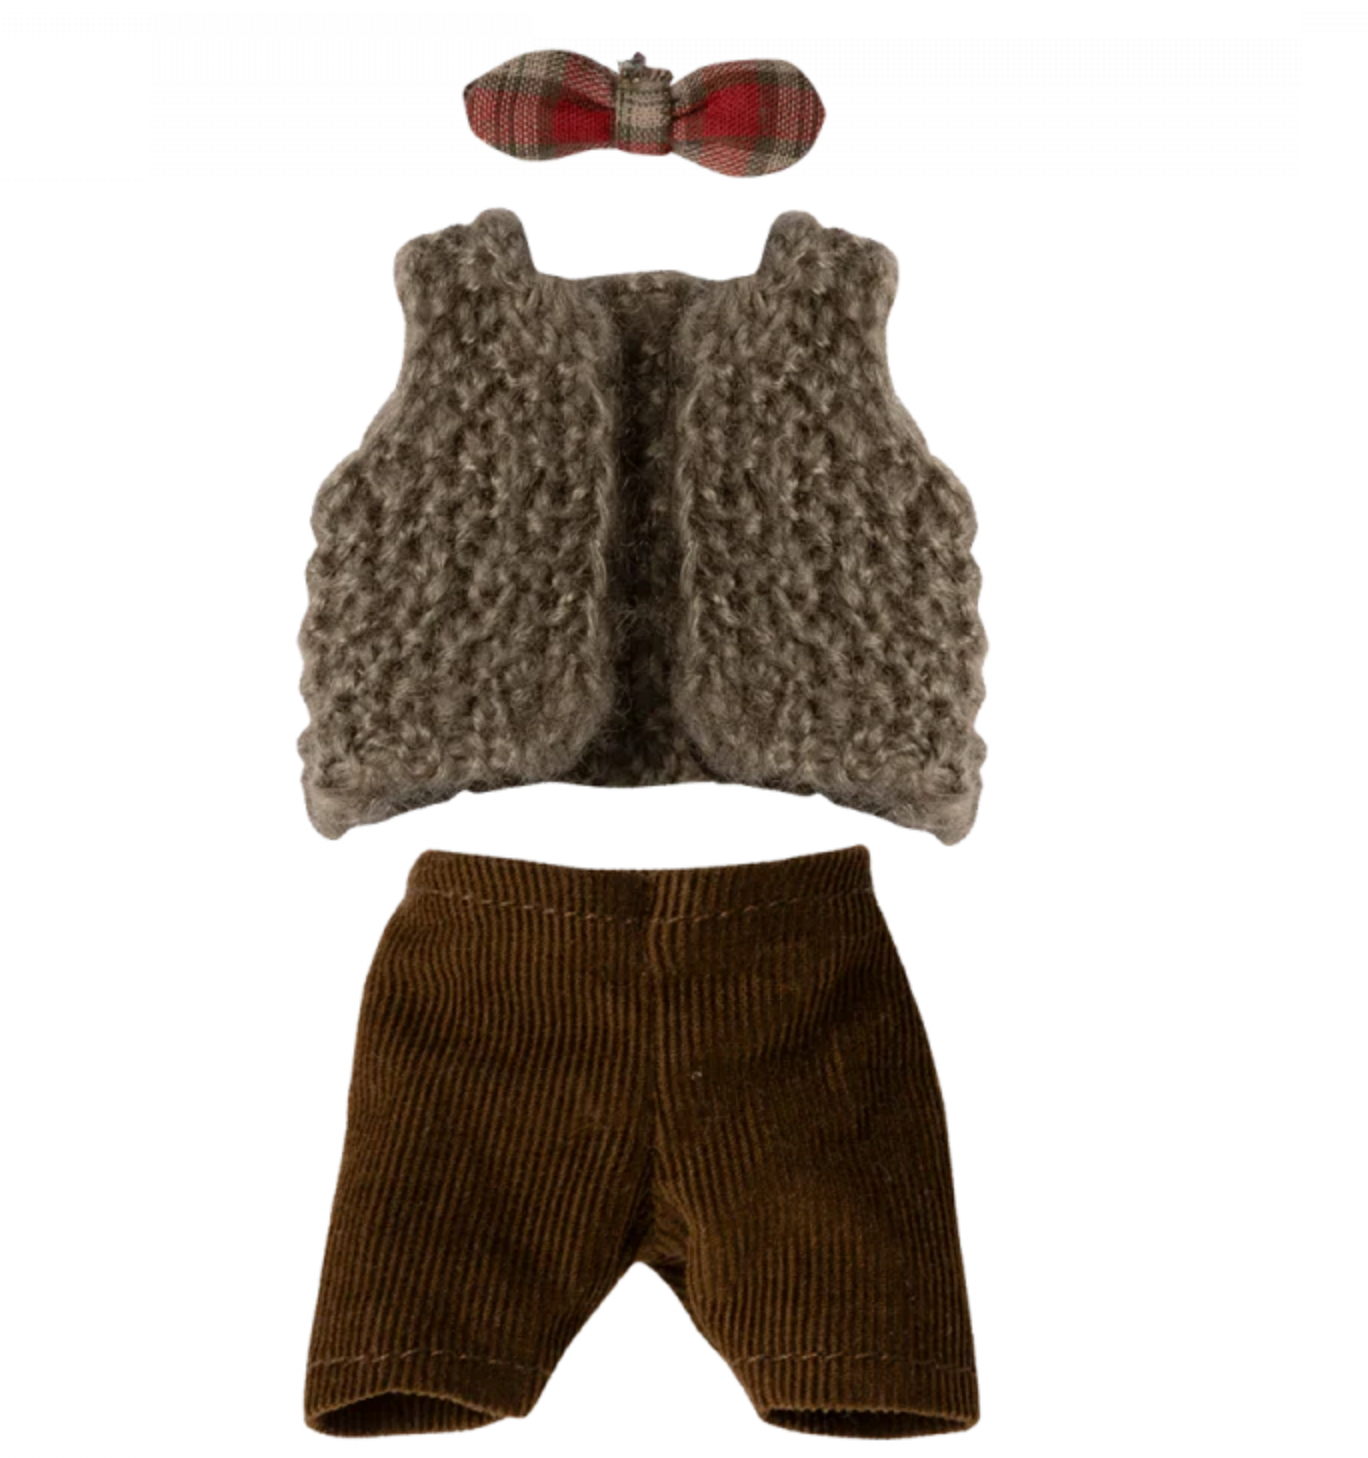 Maileg vest, pants and bowtie for grandpa